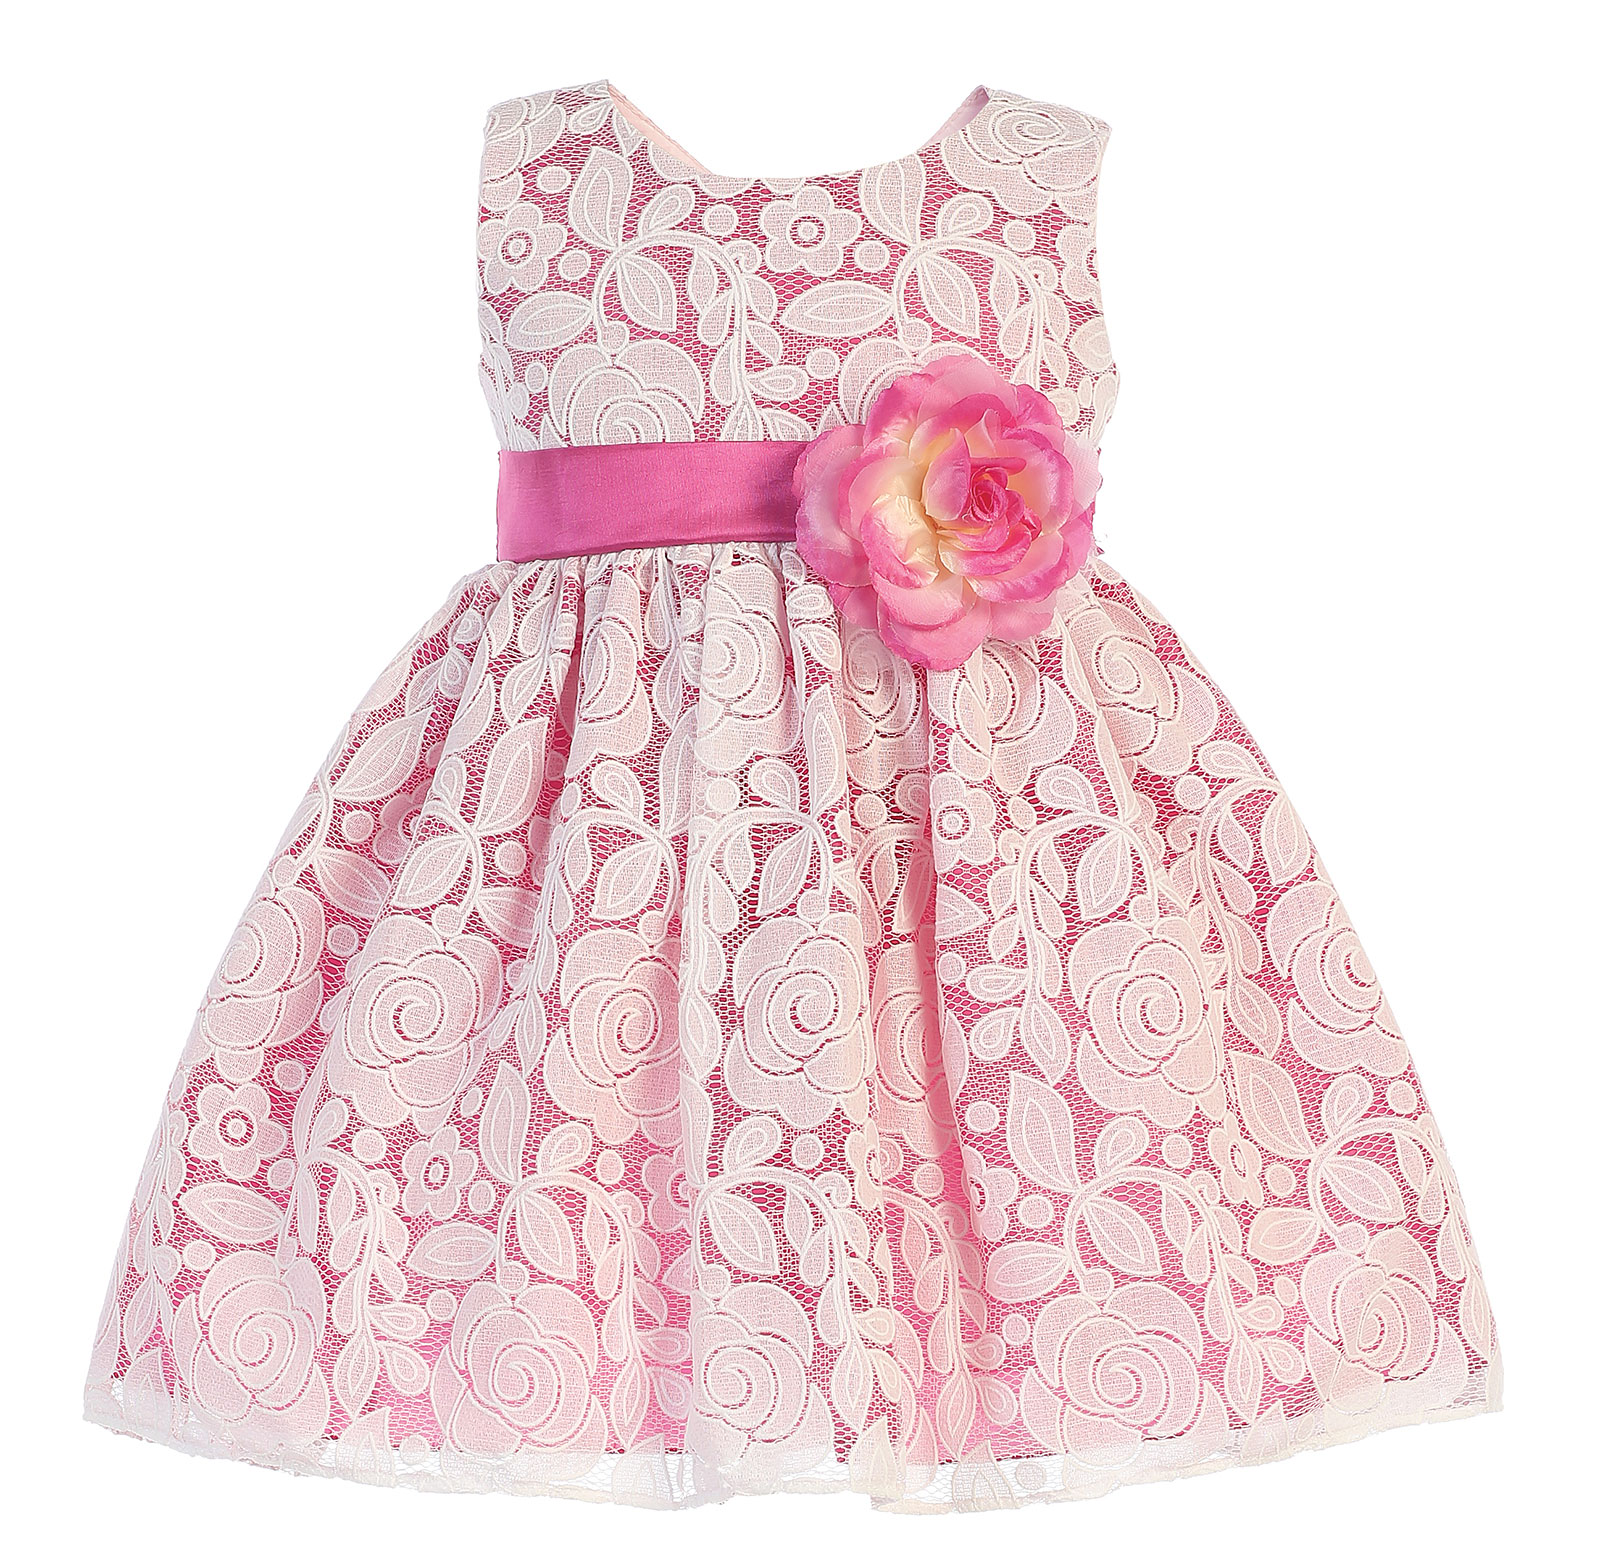 L_M726FUS - Girls Dress Style M726 - Embroidered Floral Tulle Dress in ...